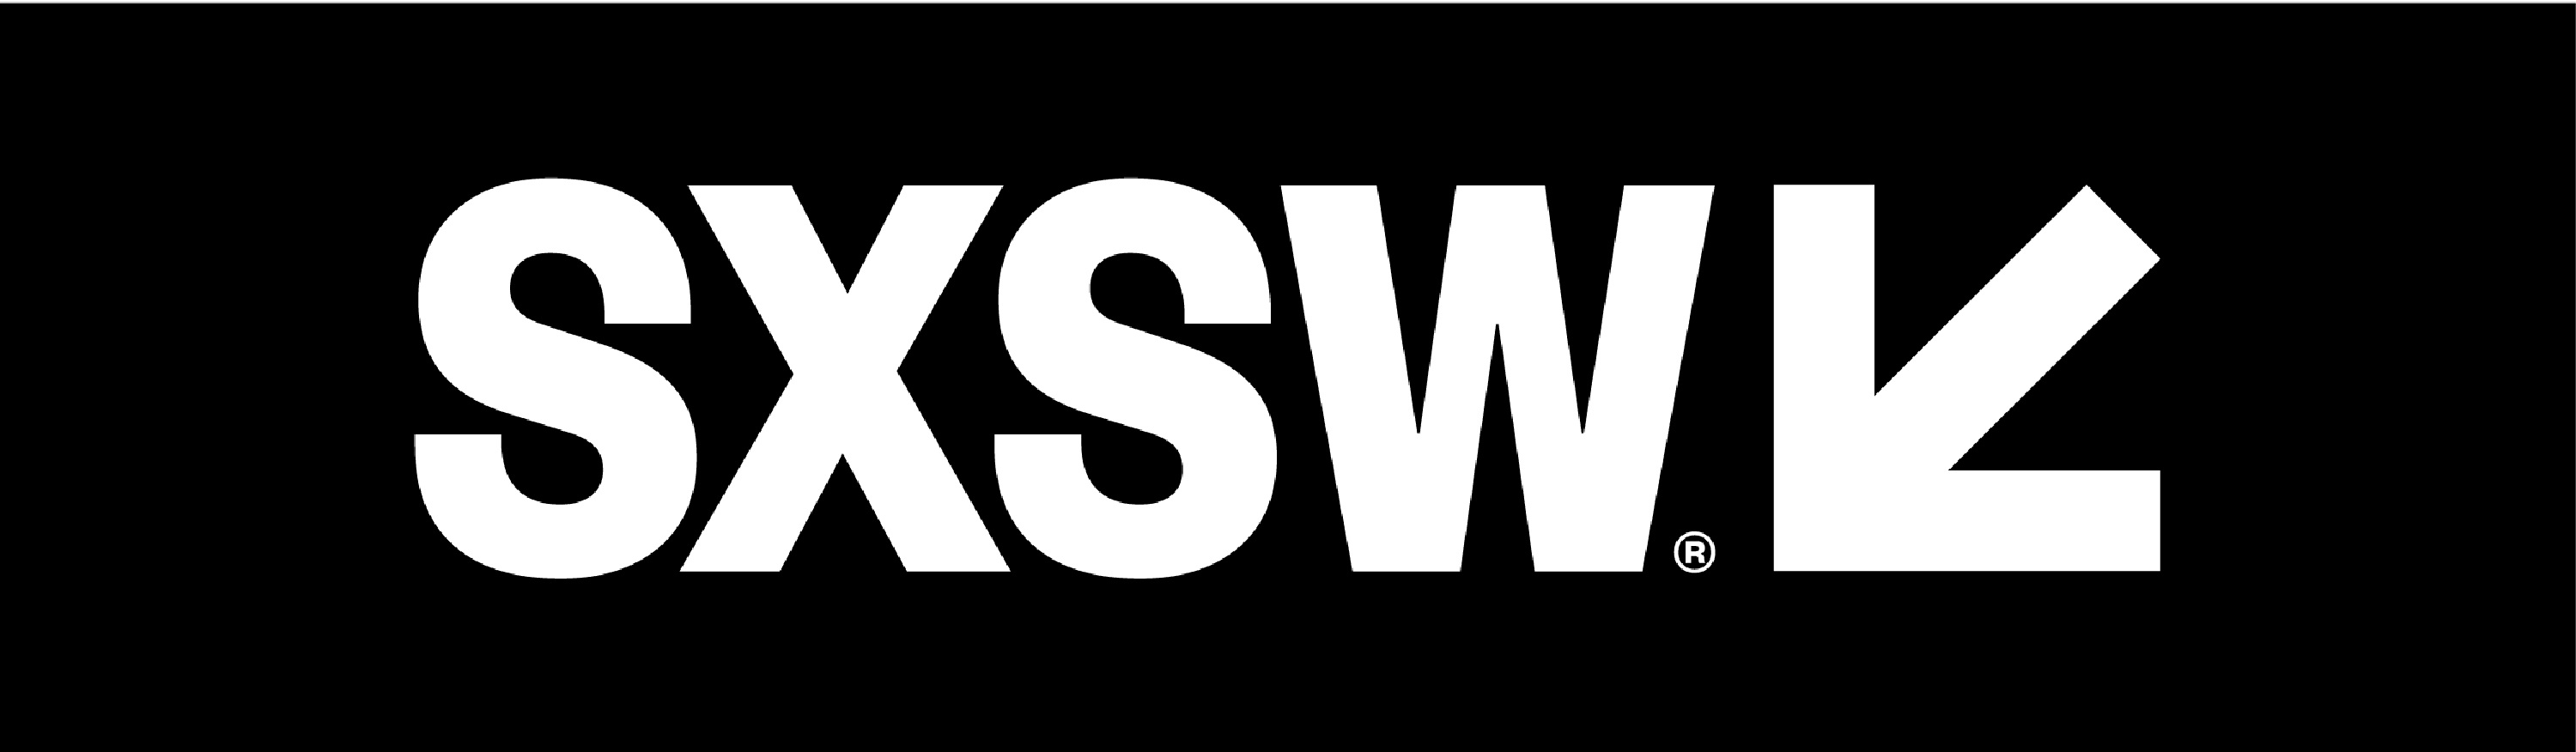 SXSW Announces New Keynotes And Featured Speakers